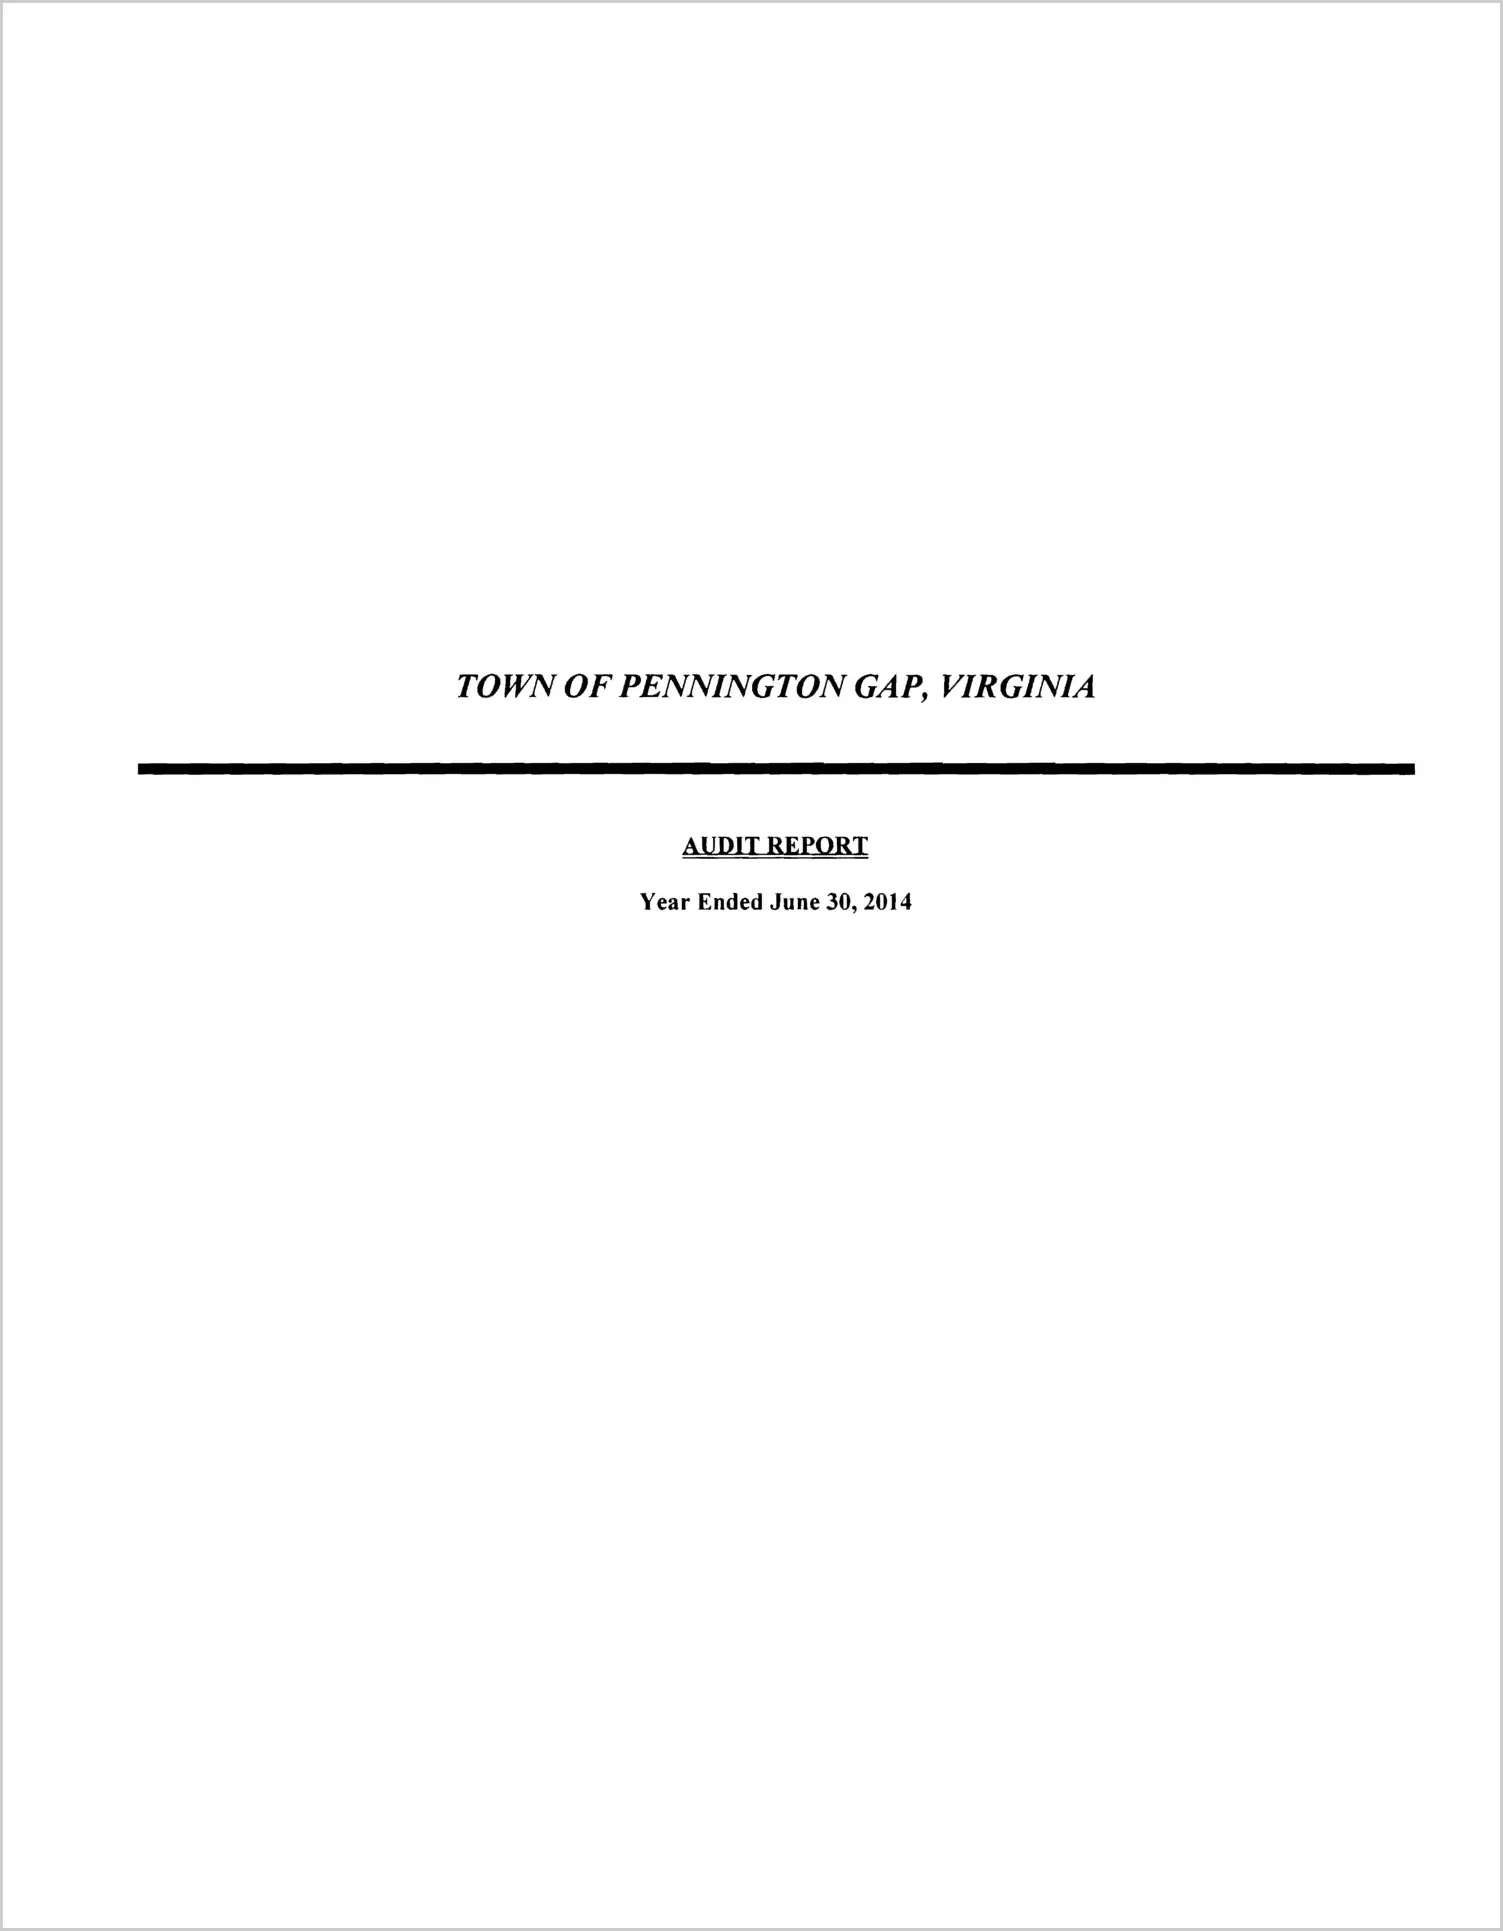 2014 Annual Financial Report for Town of Pennington Gap